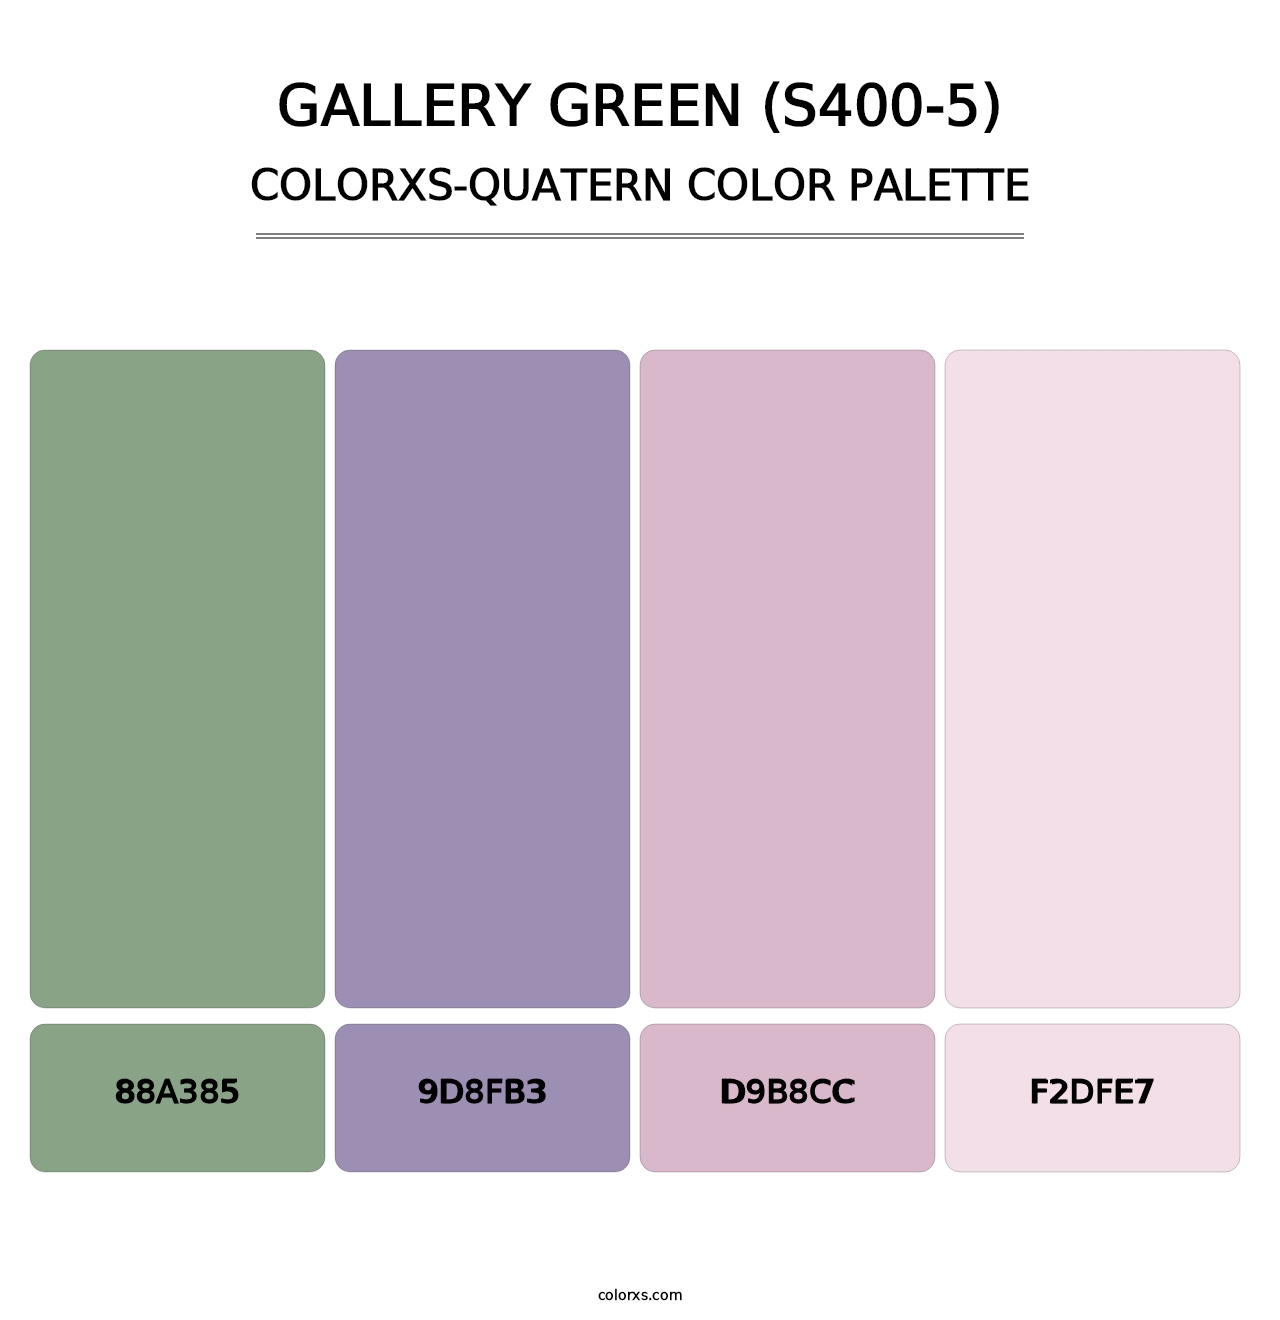 Gallery Green (S400-5) - Colorxs Quatern Palette